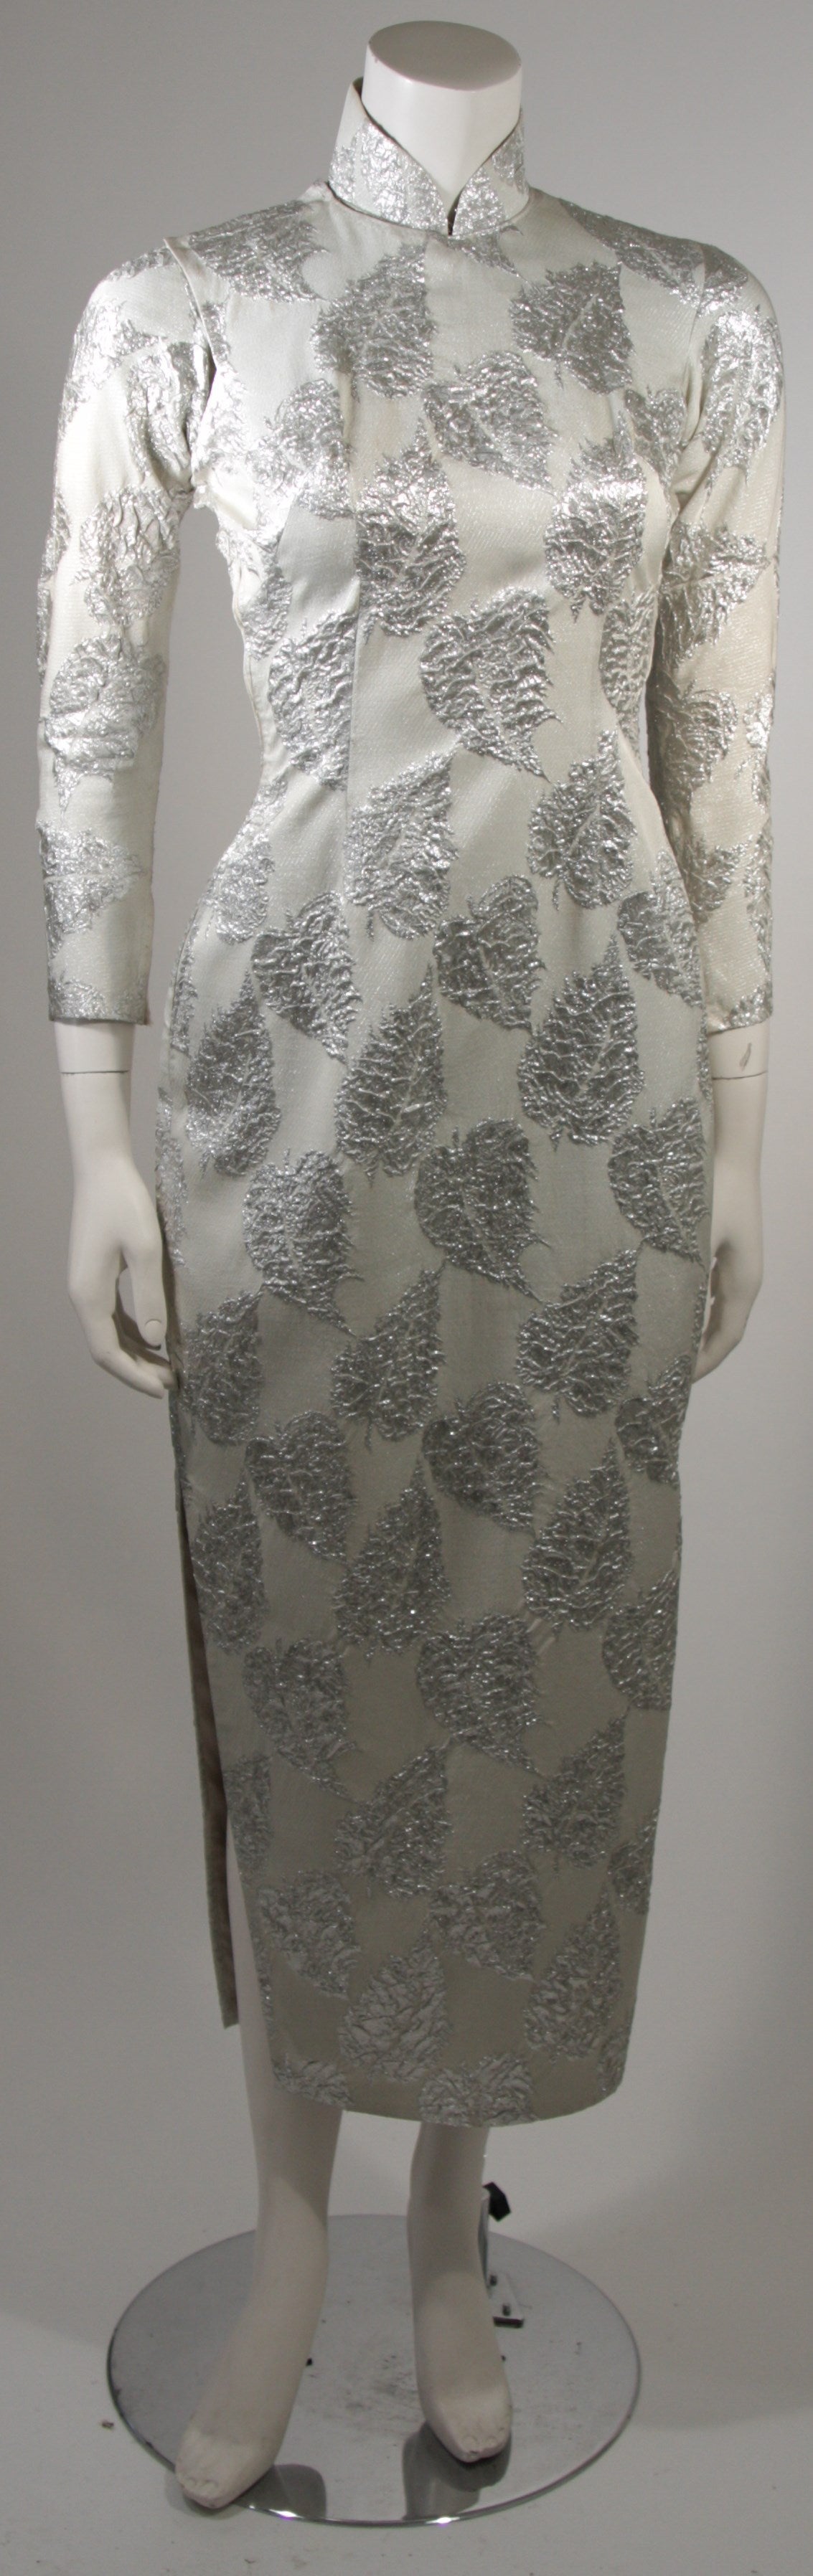 This vintage Asian inspired custom made cheongsam cocktail dress is composed of a silver silk brocade and features a mandarin styled collar, a body skimming design with slits at the side for ease of movement. There is a side zipper and snap